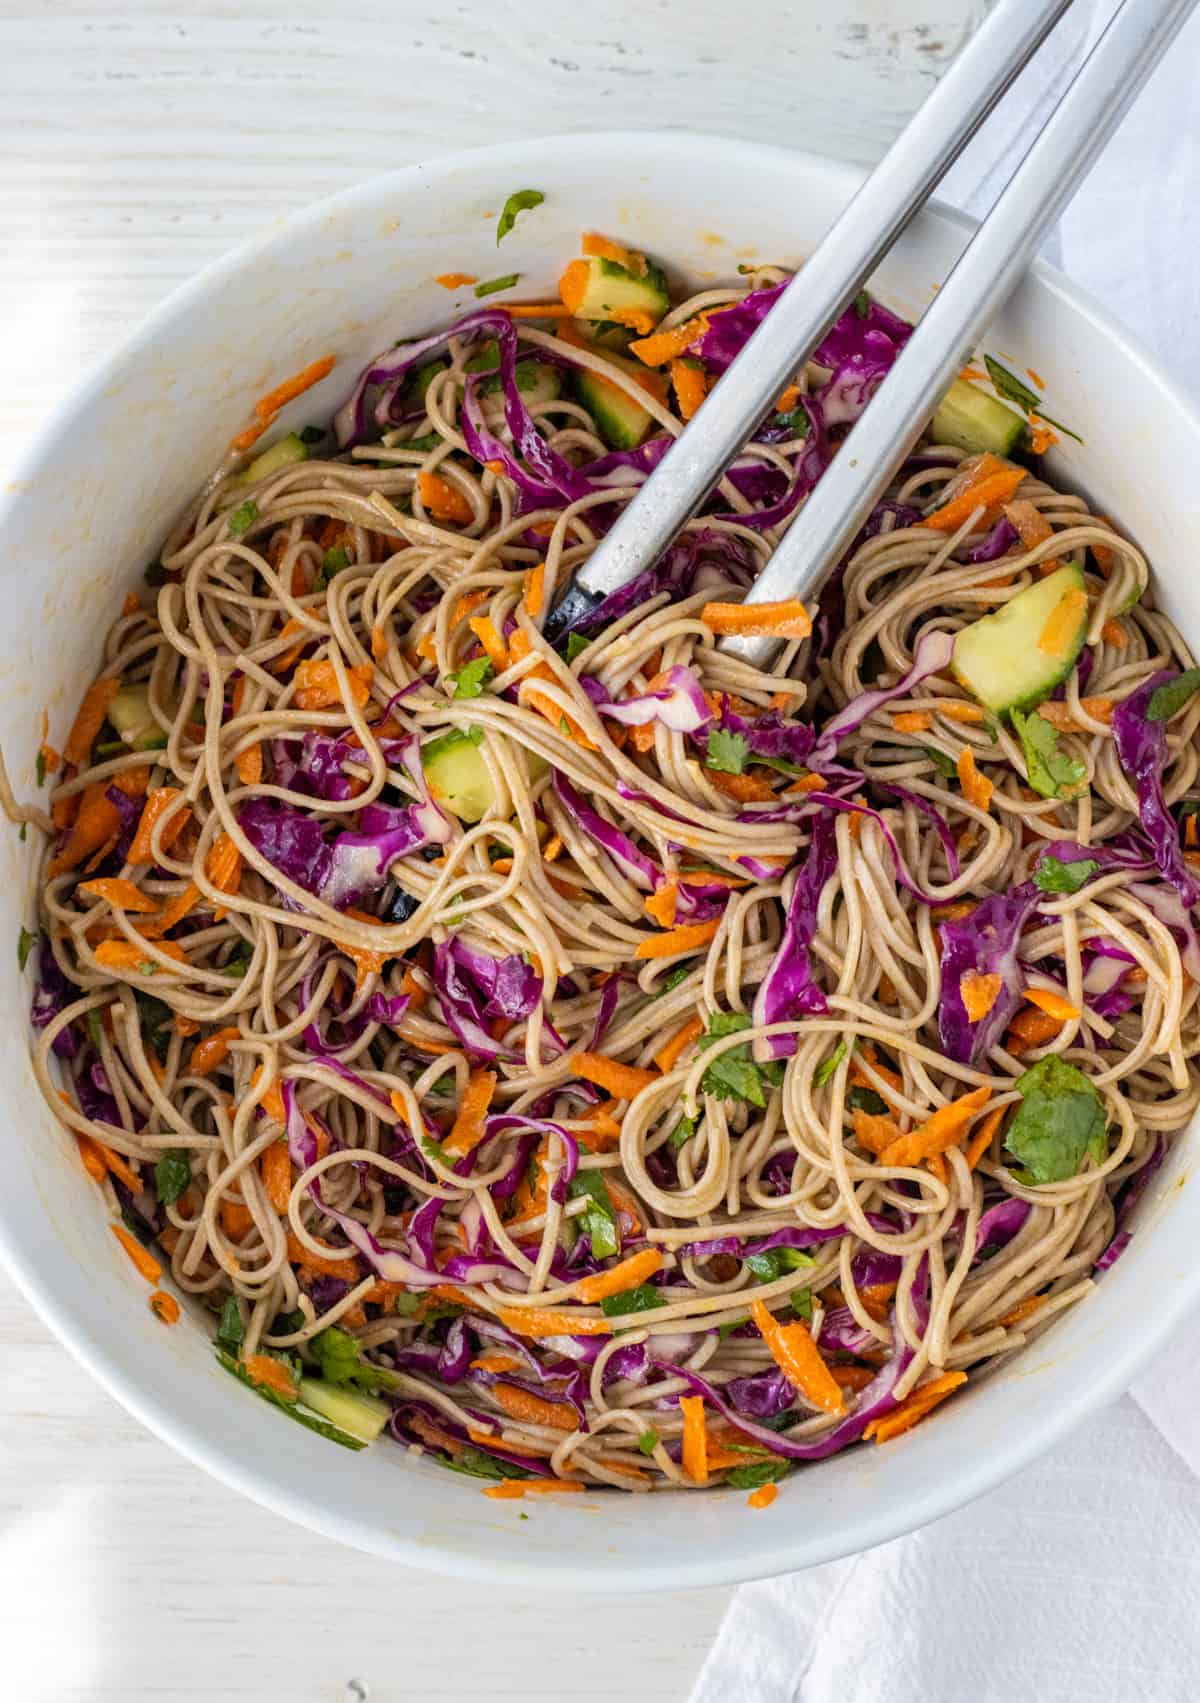 Soba noodle salad tossed in miso dressing in a large bowl with a pair of tongs.